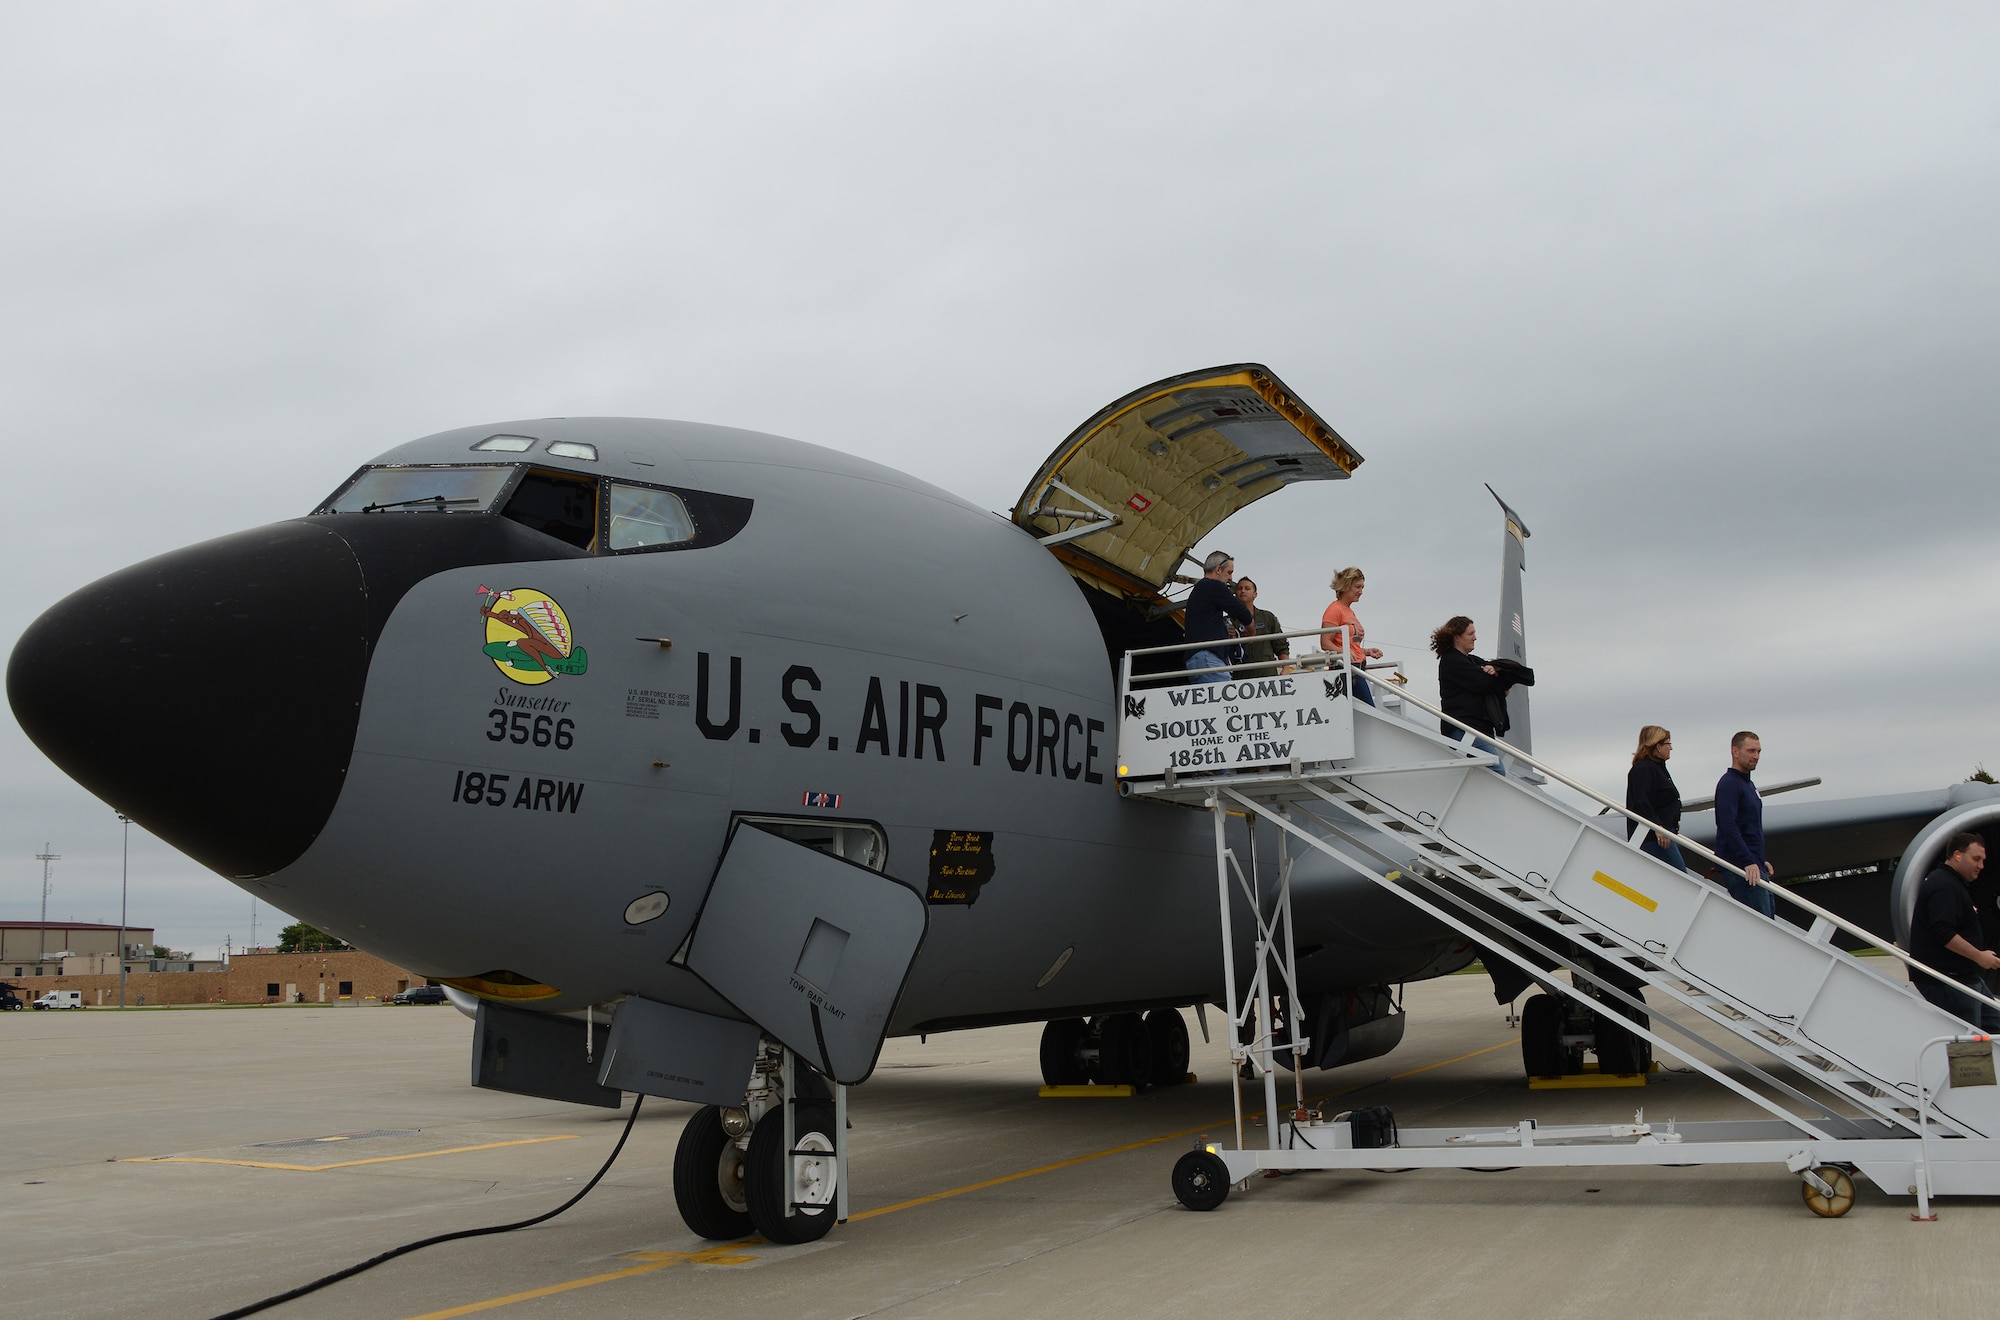 Area civilian employers depart a U.S. Air Force KC-135 assigned to the 185th Air Refueling Wing, Iowa Air National Guard in Sioux City, Iowa on September 22, 2016. During the flight the passengers were able to watch a mid-air refueling as part of an Employer Support of the Guard and Reserve “Boss Lift” program.

U.S. Air National Guard photo by Master Sgt. Vincent De Groot 185th ARW Wing PA